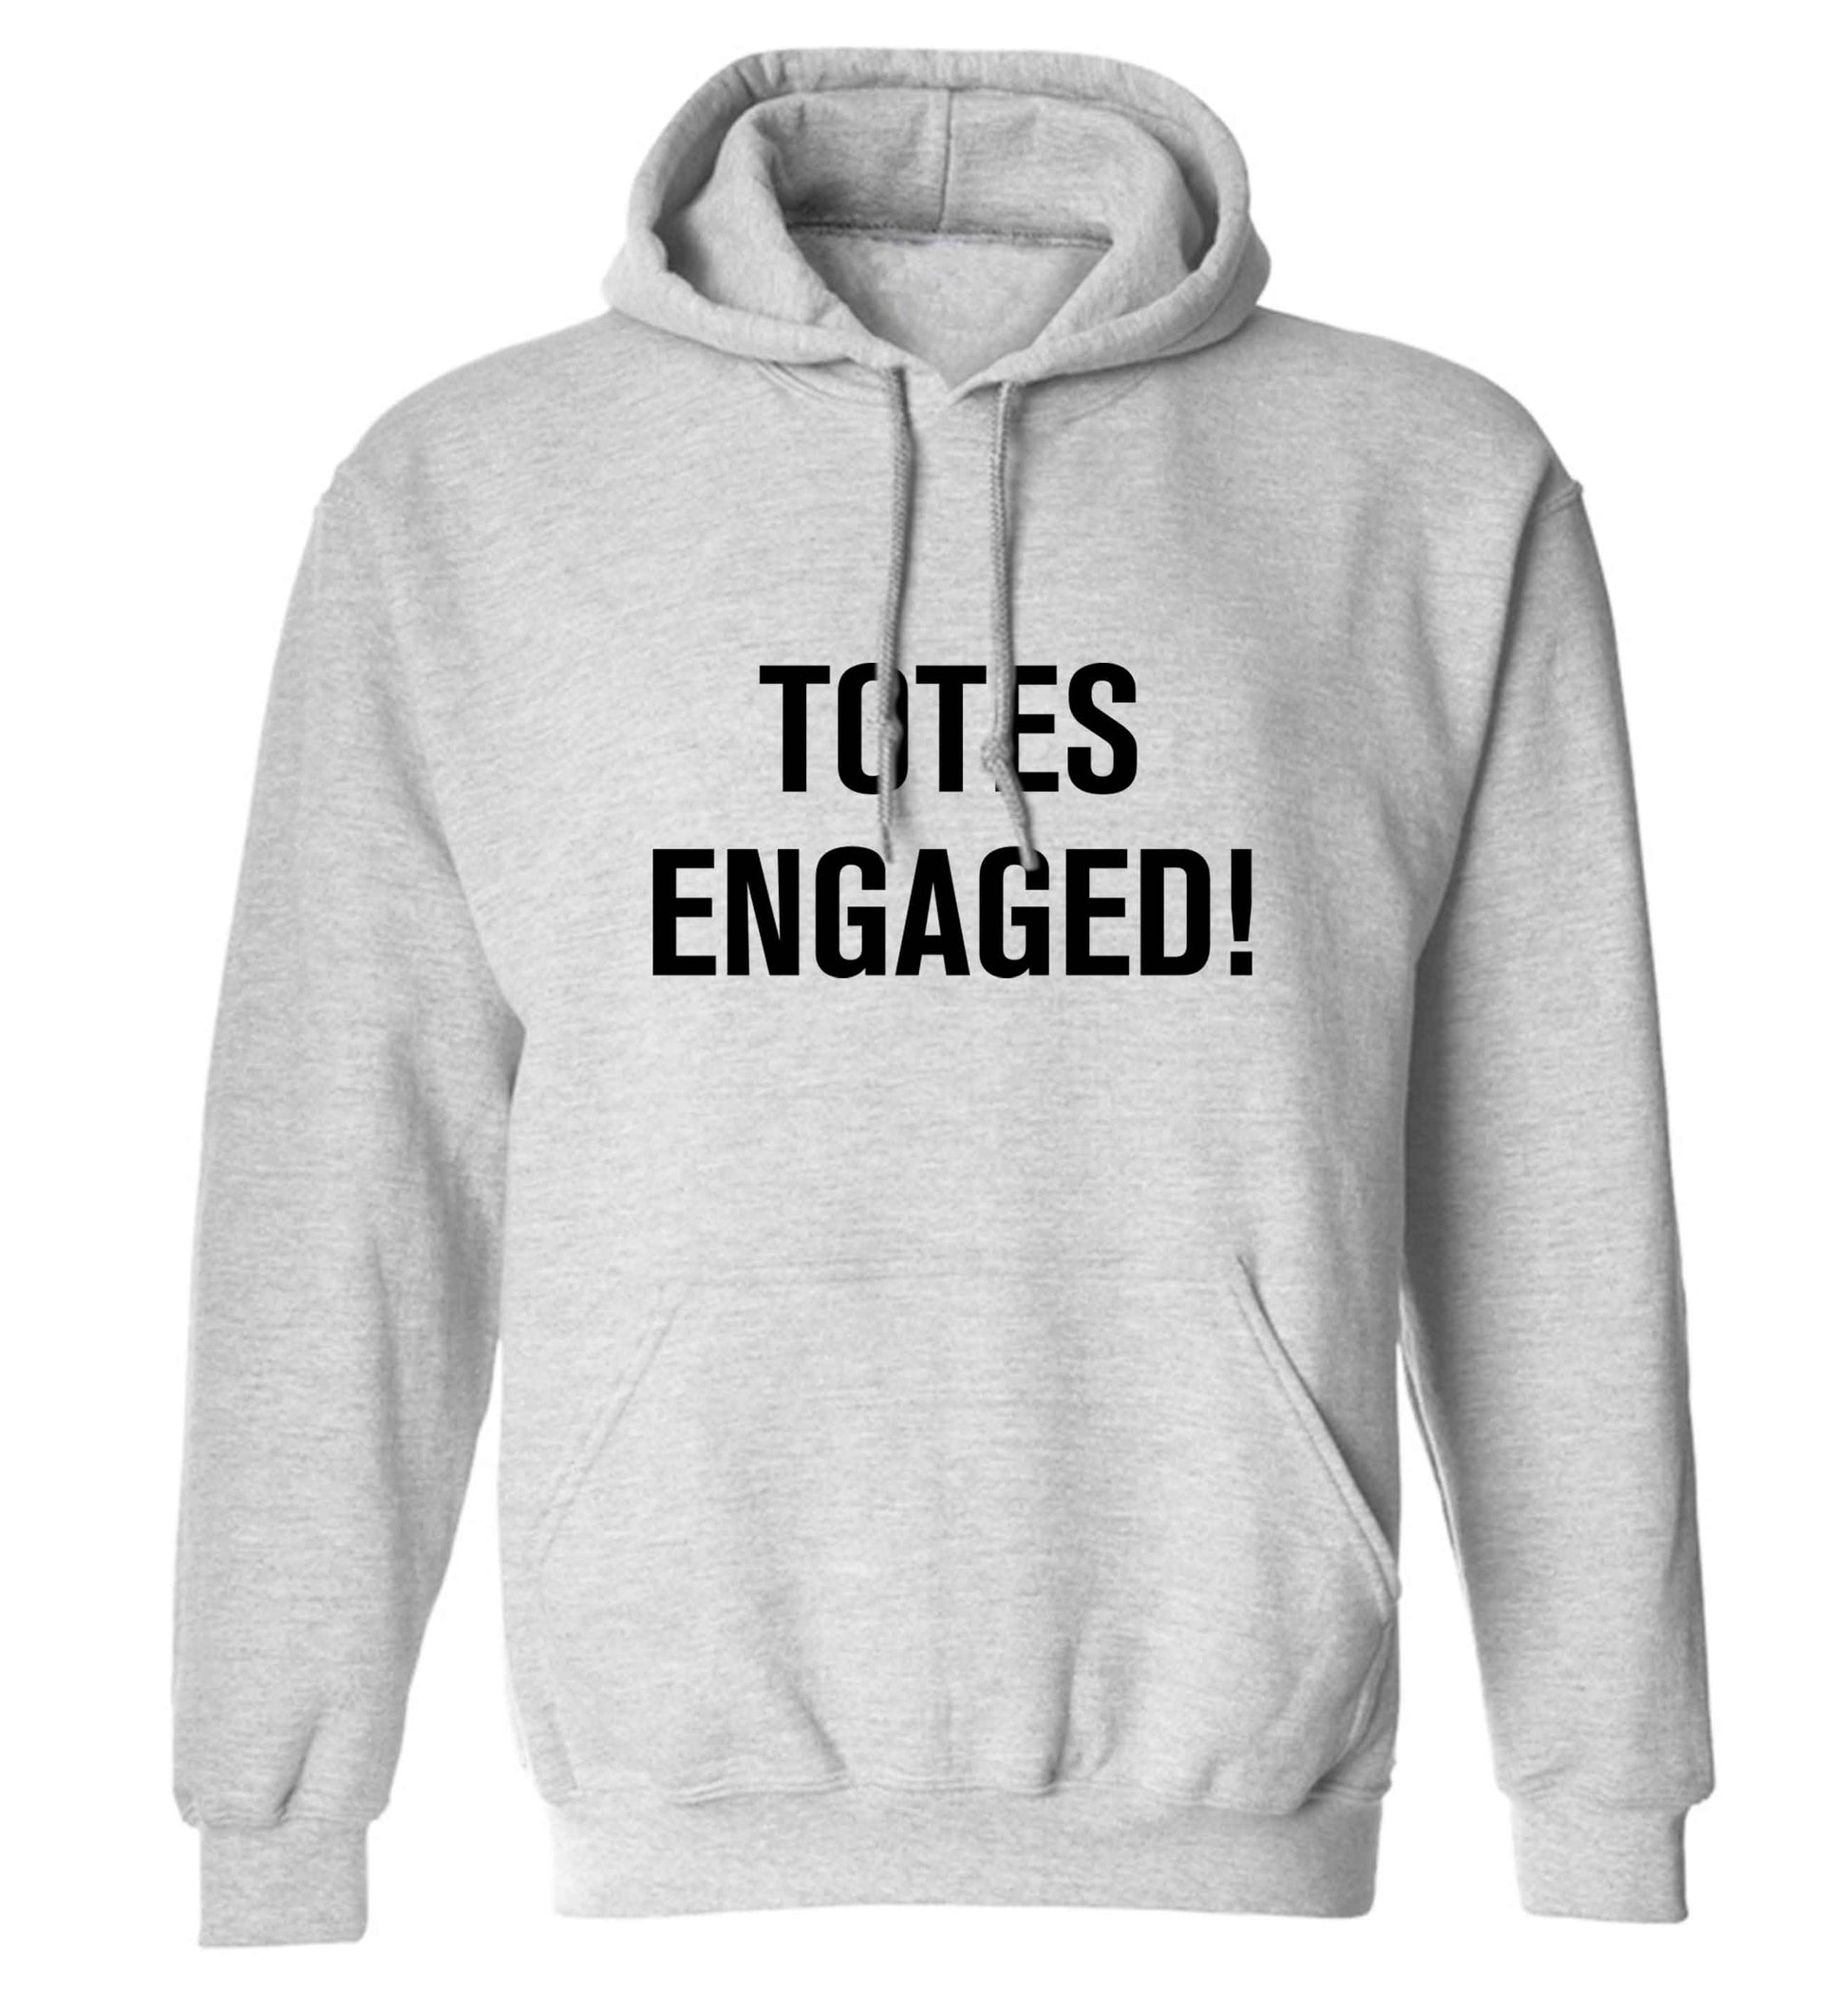 Totes engaged adults unisex grey hoodie 2XL